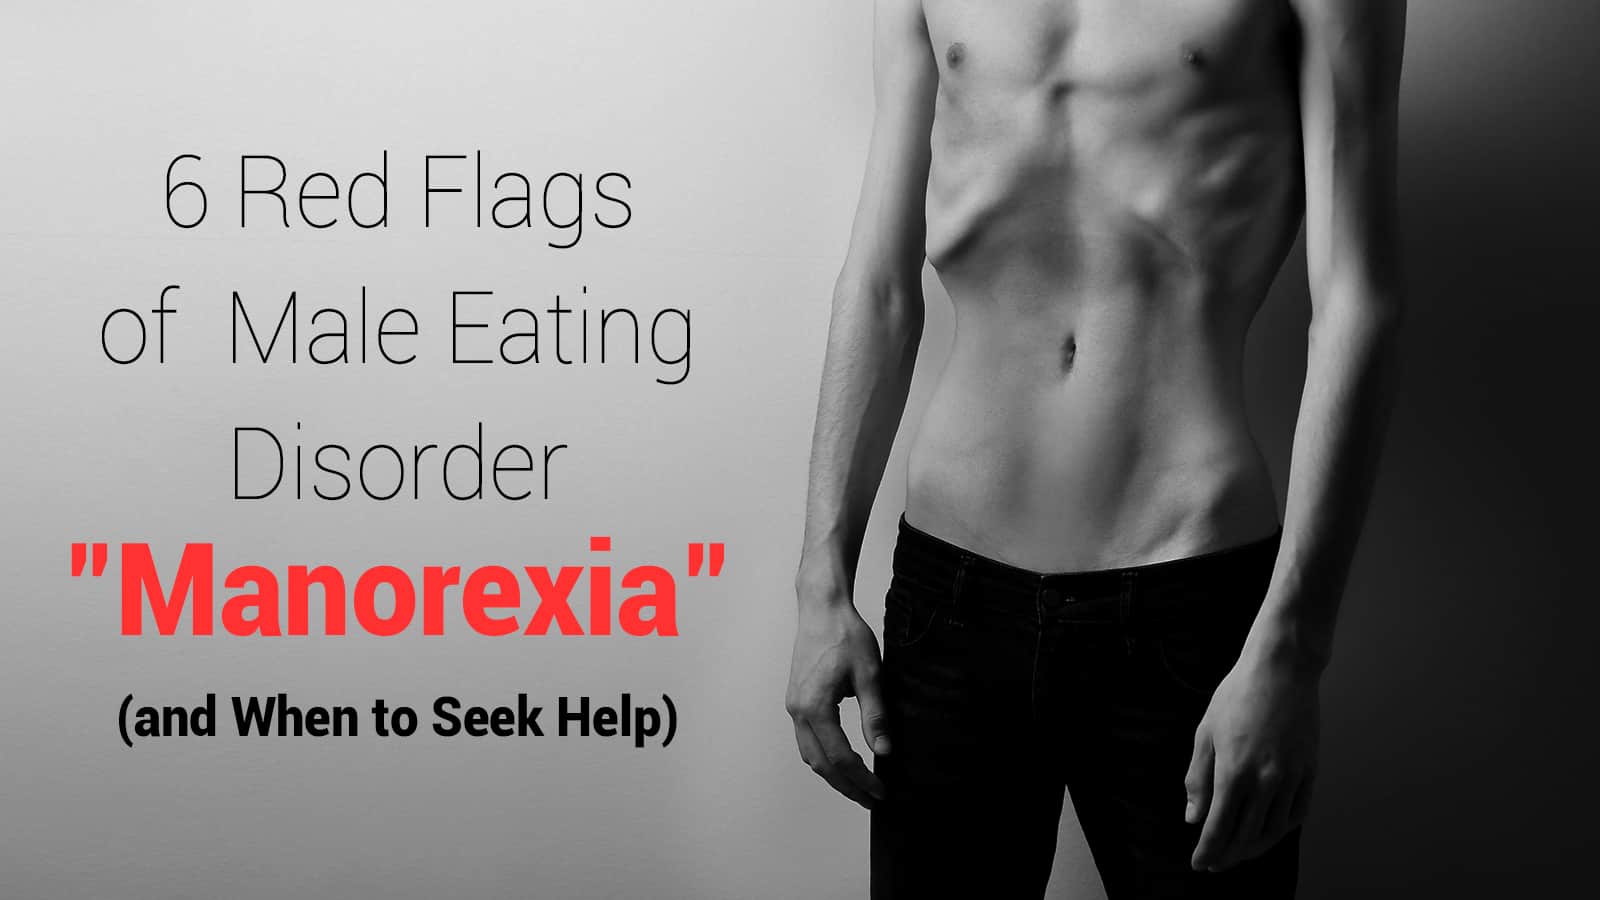 6 Red Flags of Male Eating Disorder “Manorexia”